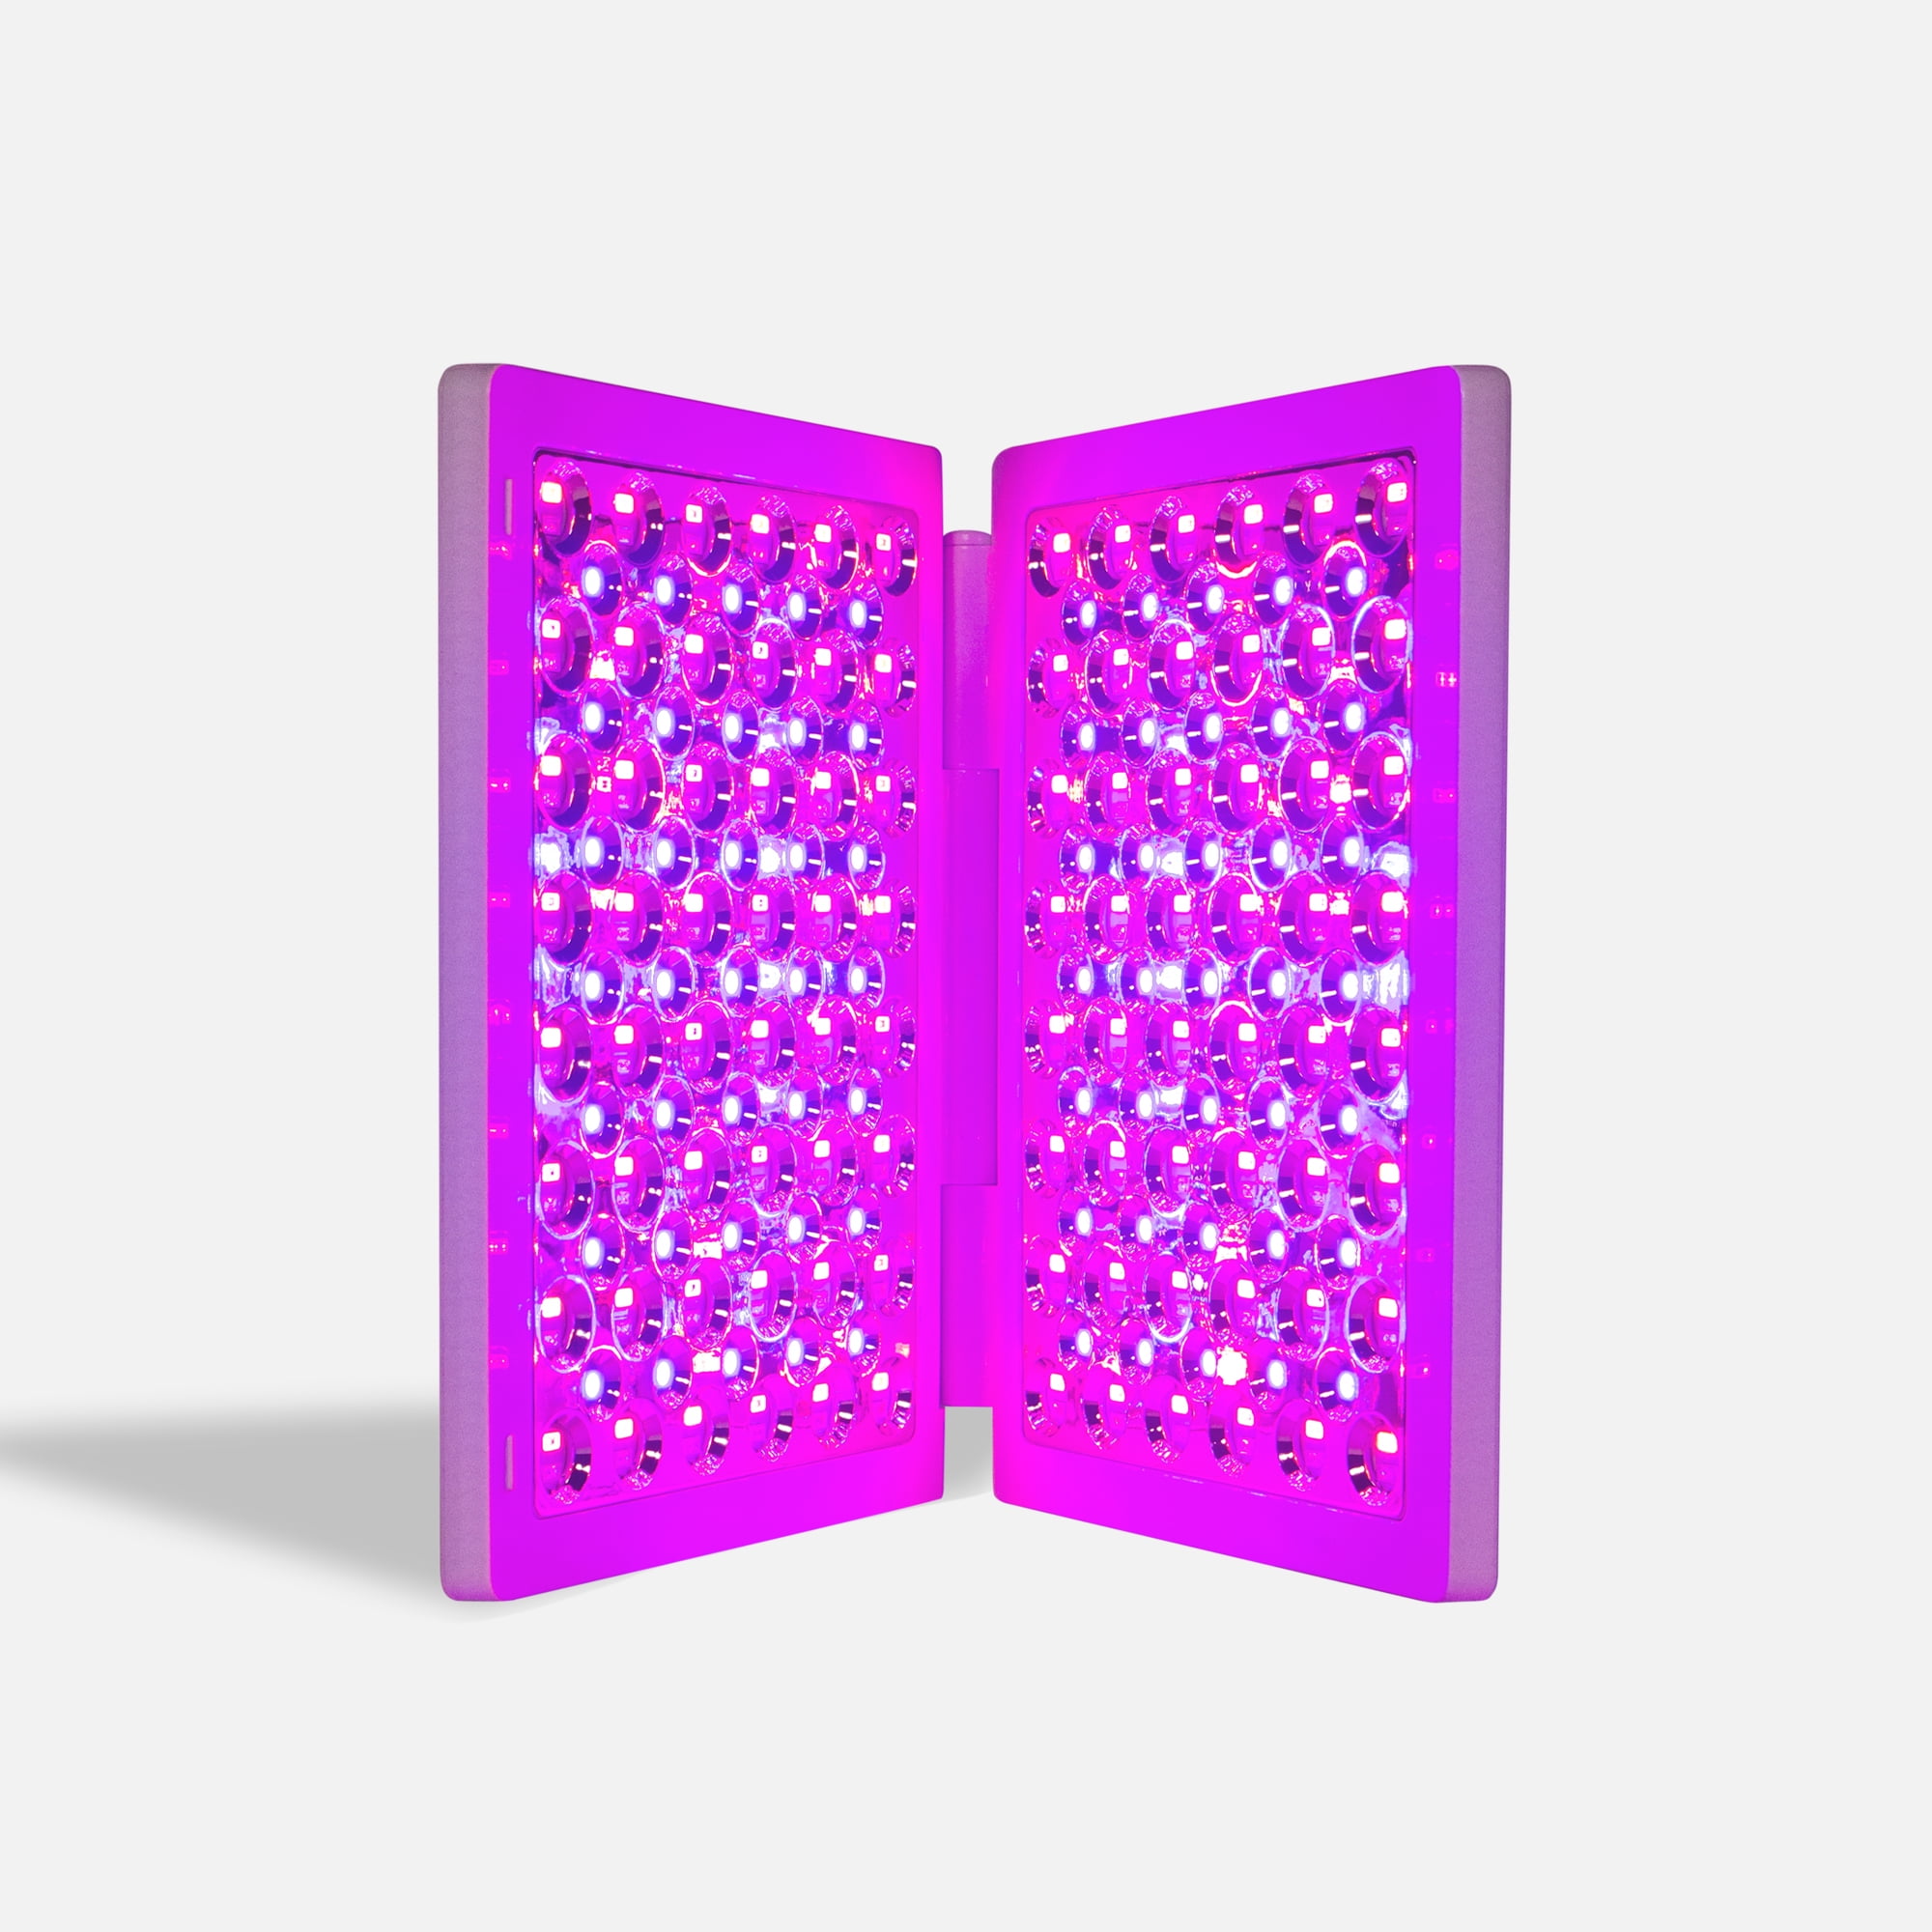 Revive Light Therapy Dpl Iia Led Panel